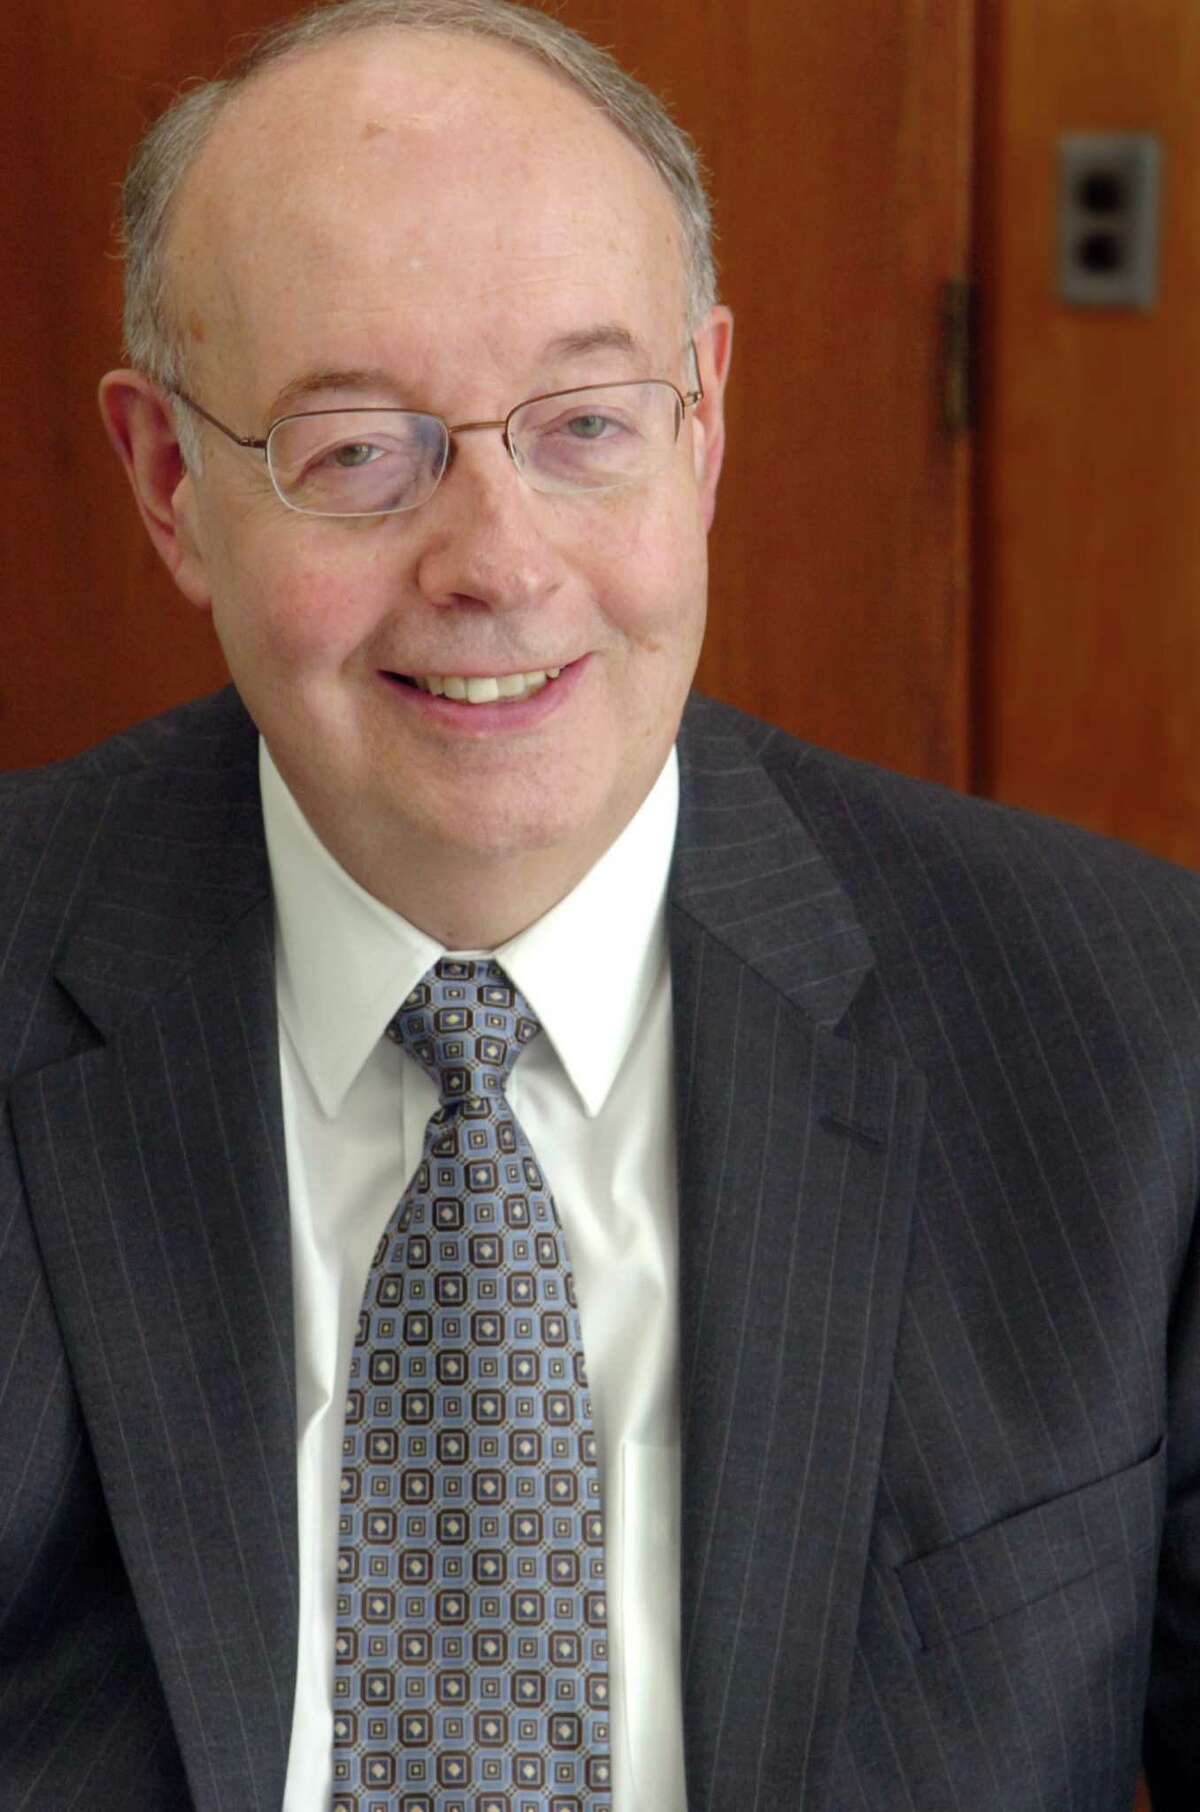 Greenwich Town Administrator John Crary made $185,780.72 in 2012.